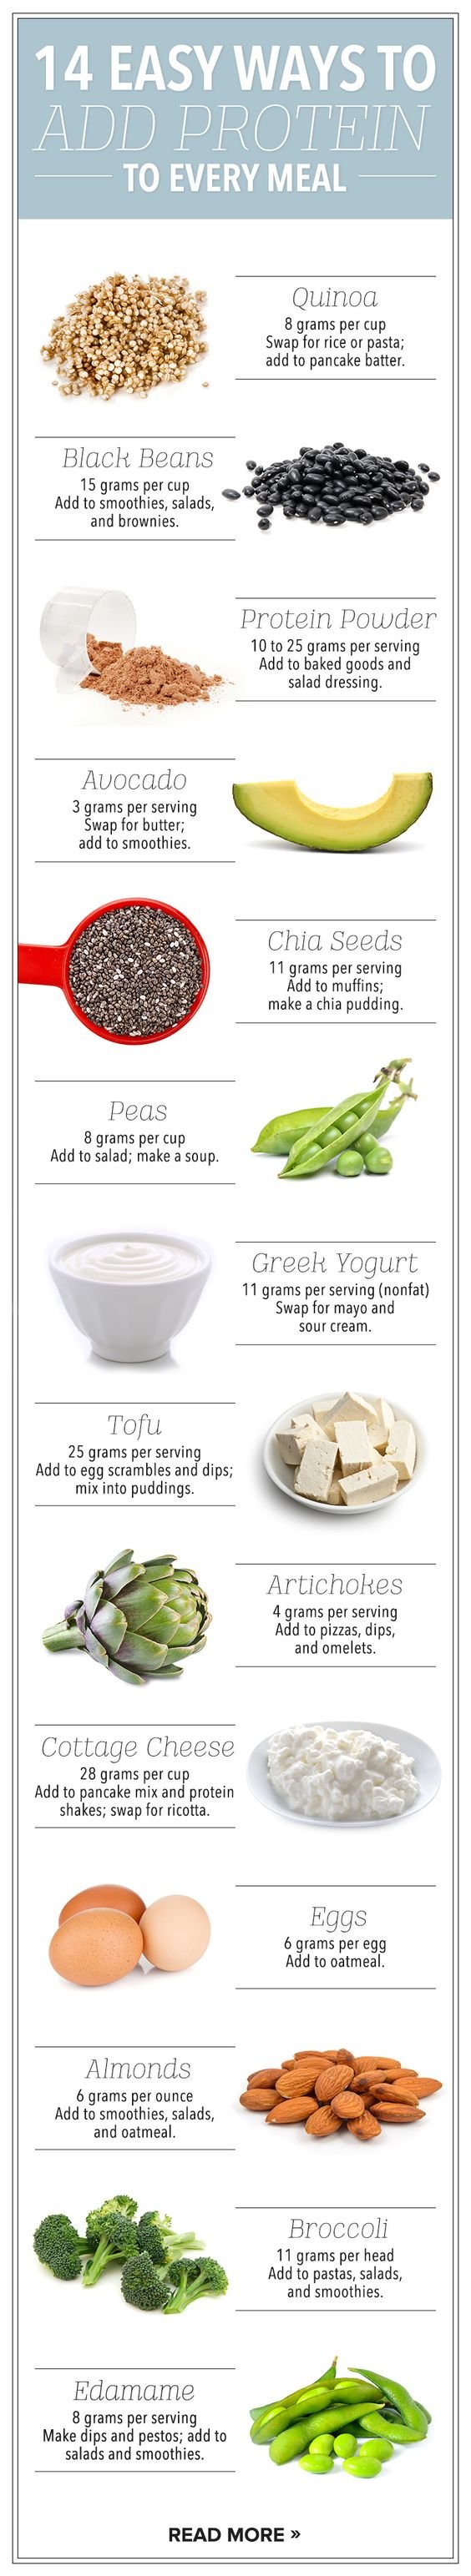 easy ways to add protein to every meal